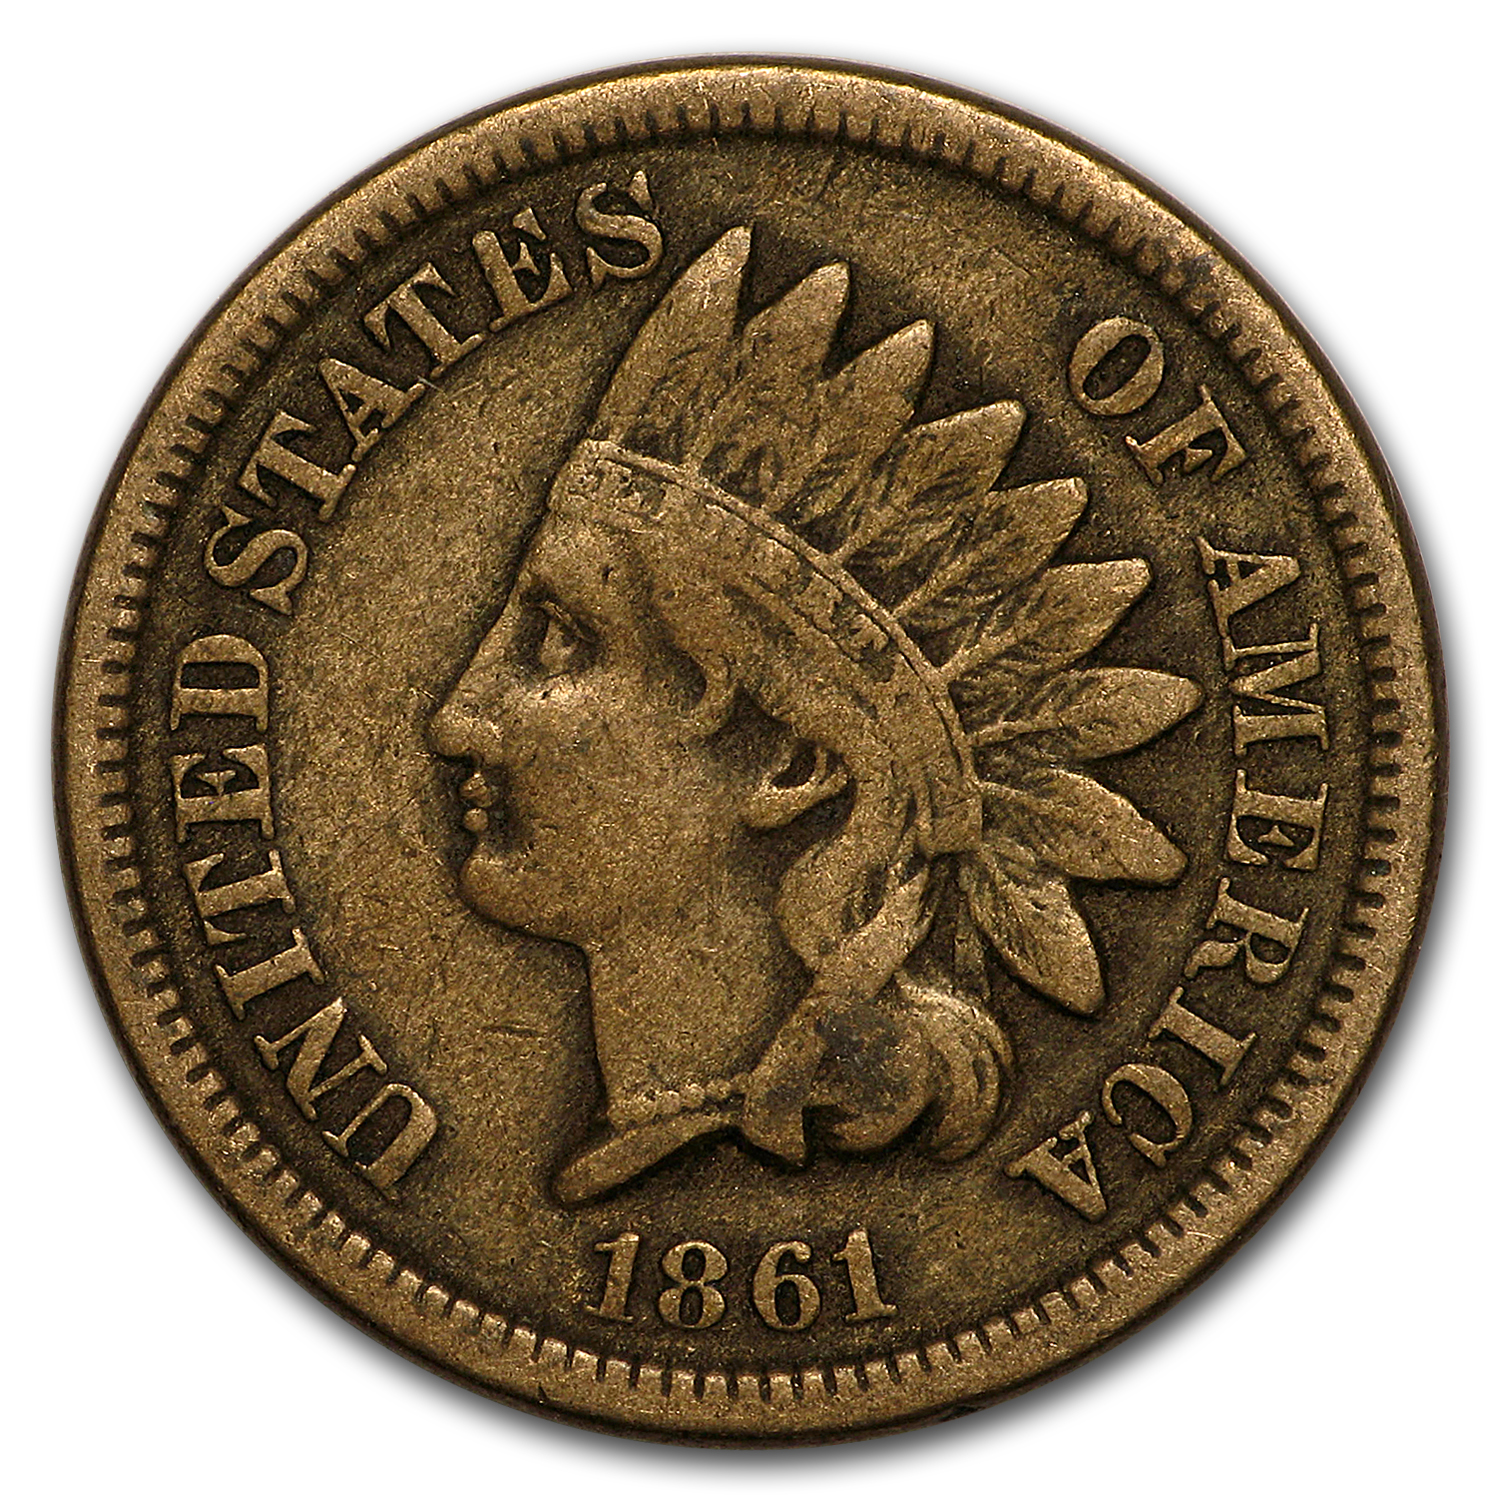 Buy 1861 Indian Head Cent VF